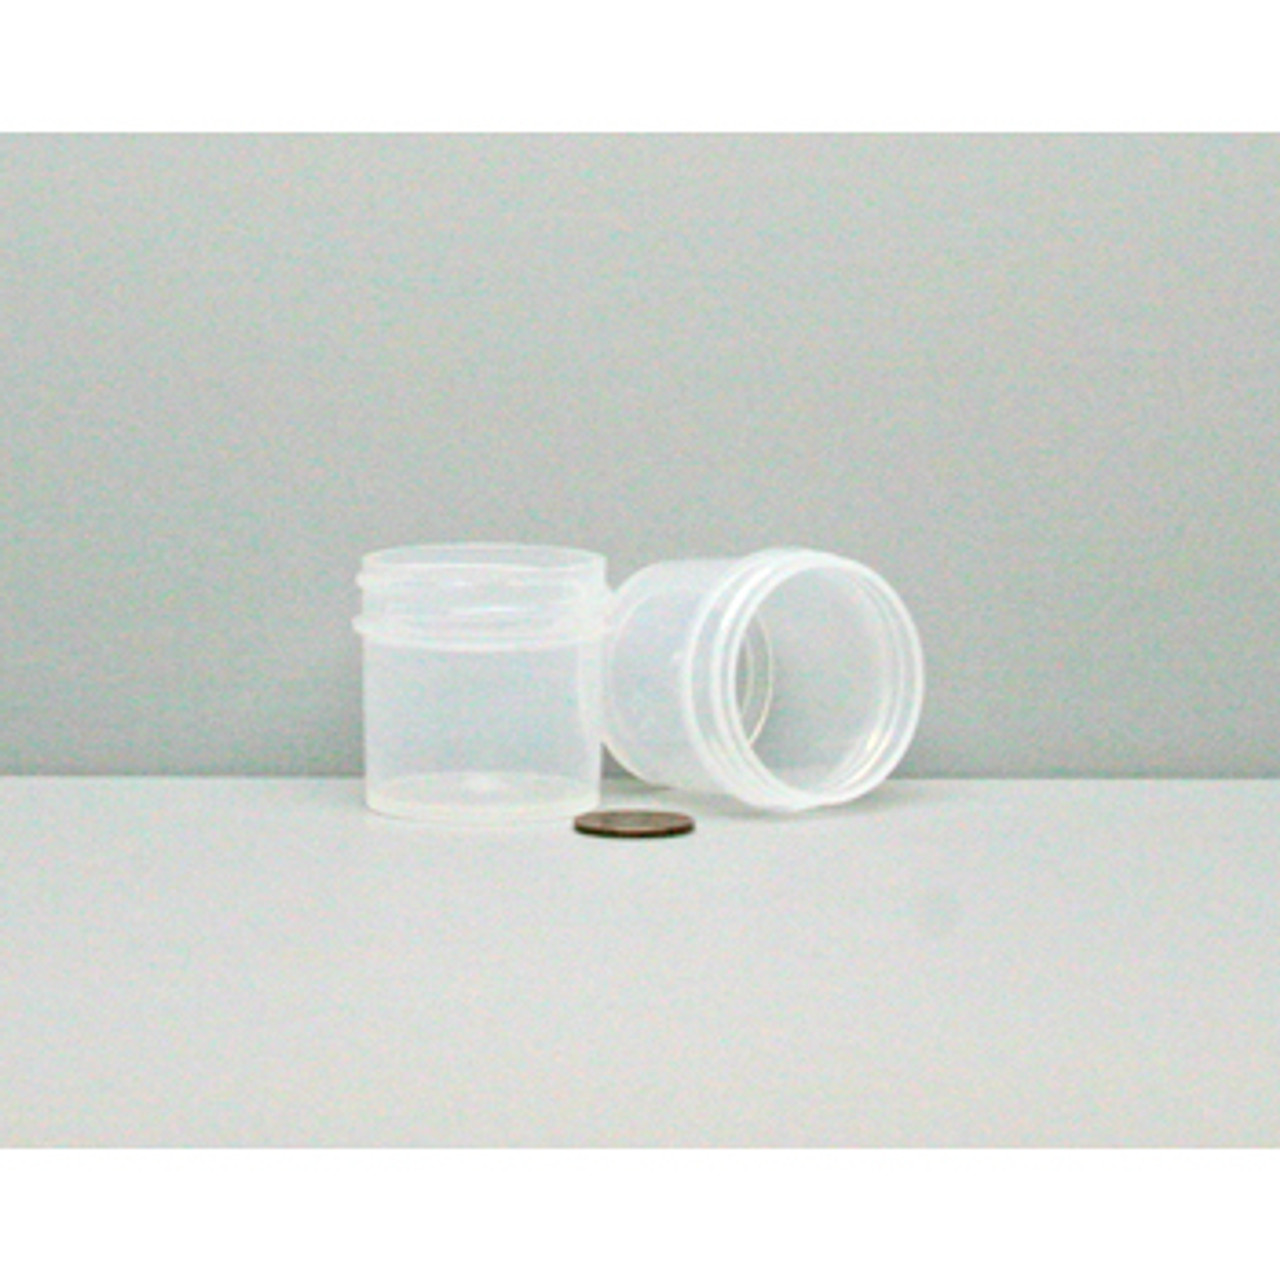 1 oz Clear Glass Straight Sided Jars 43-400 Neck Finish